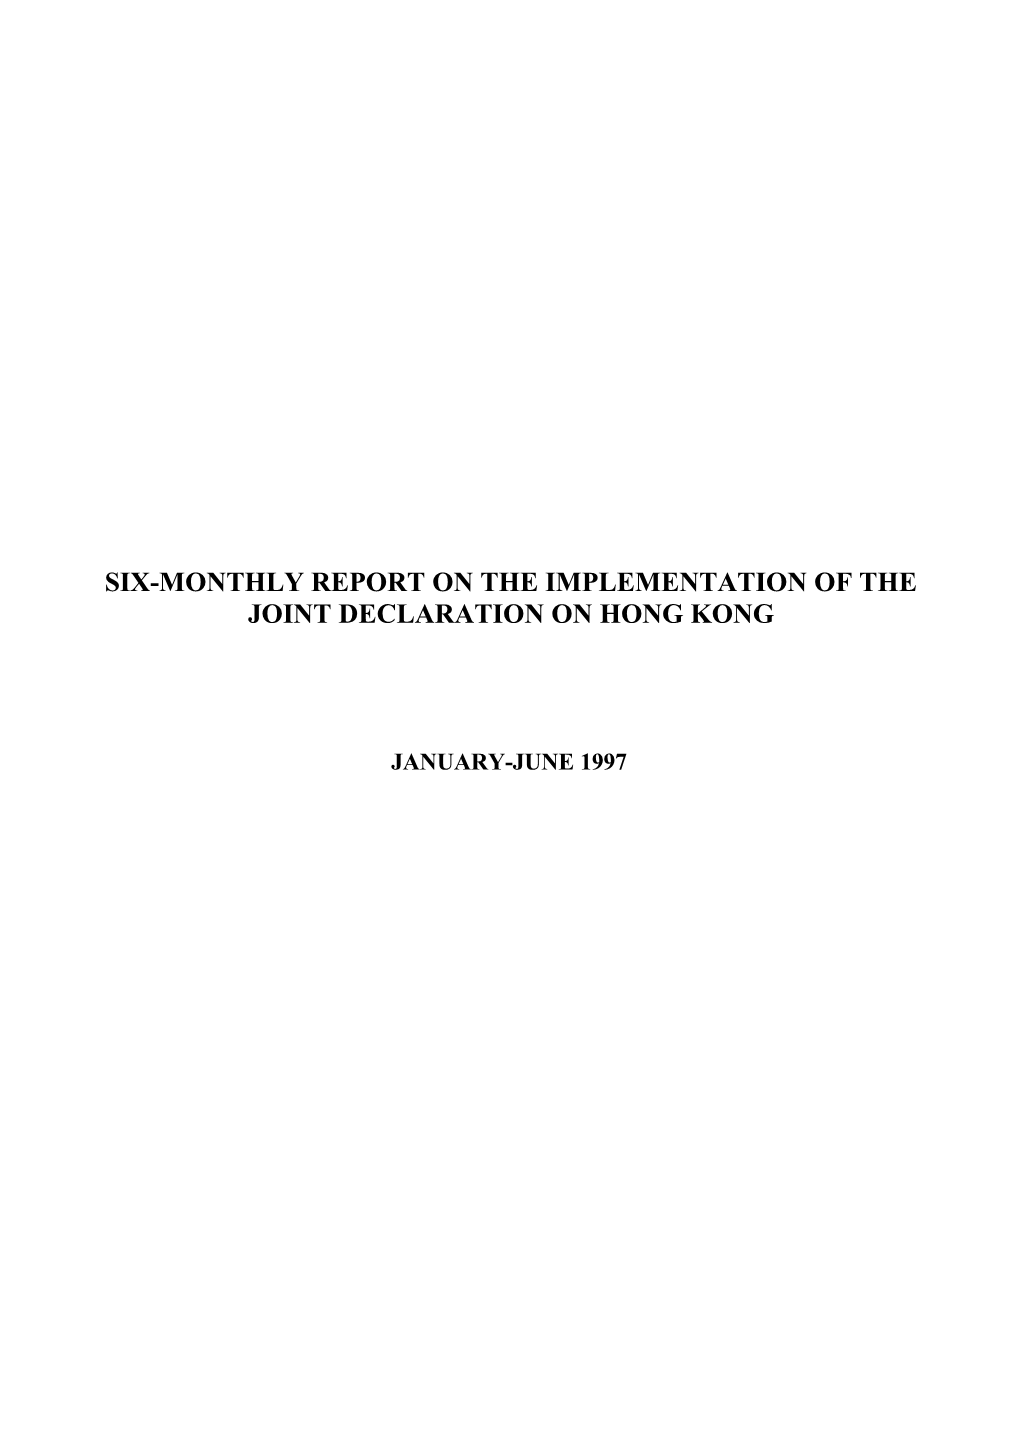 Six-Monthly Report on the Implementation of the Joint Declaration on Hong Kong